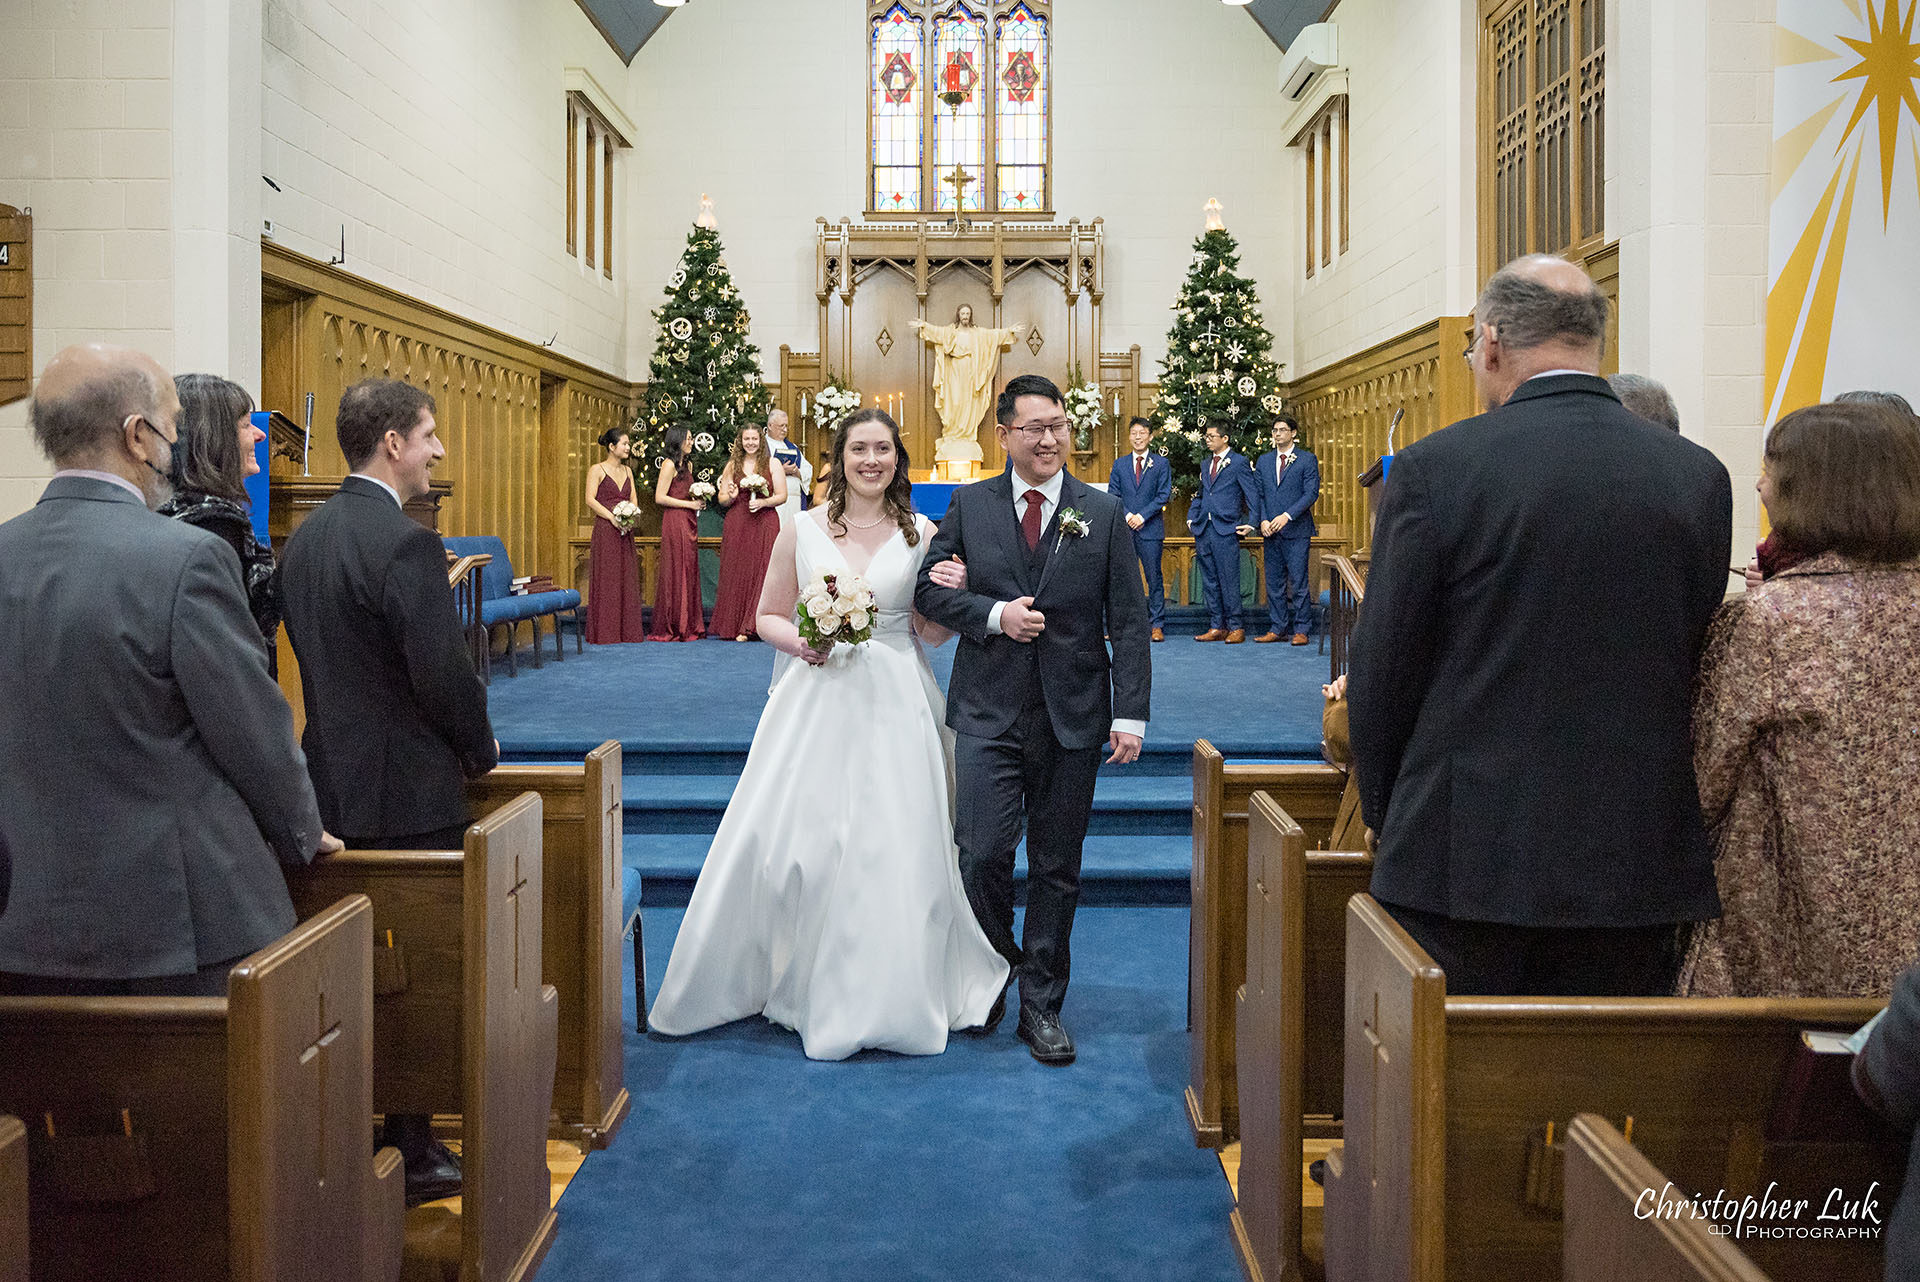 Wedding Ceremony Kitchener Waterloo Church Winter Stained Glass Windows Bride Groom Walking Down the Centre Aisle Together Recessional 